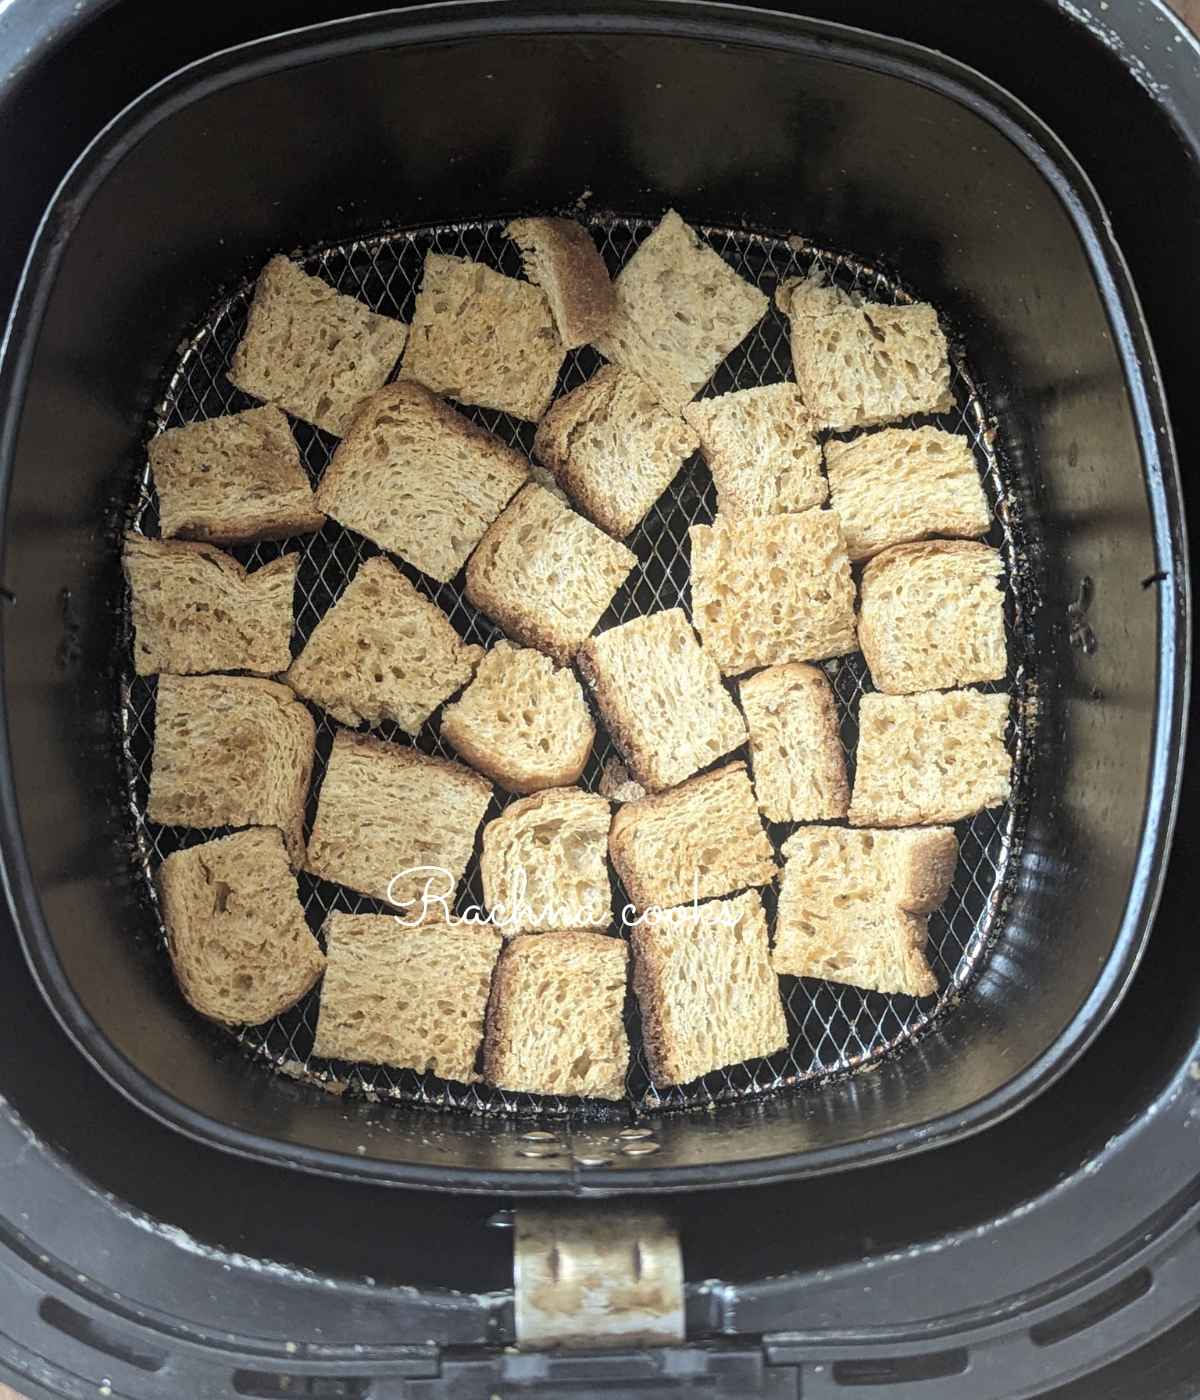 Bread cubes after air frying in air fryer basket